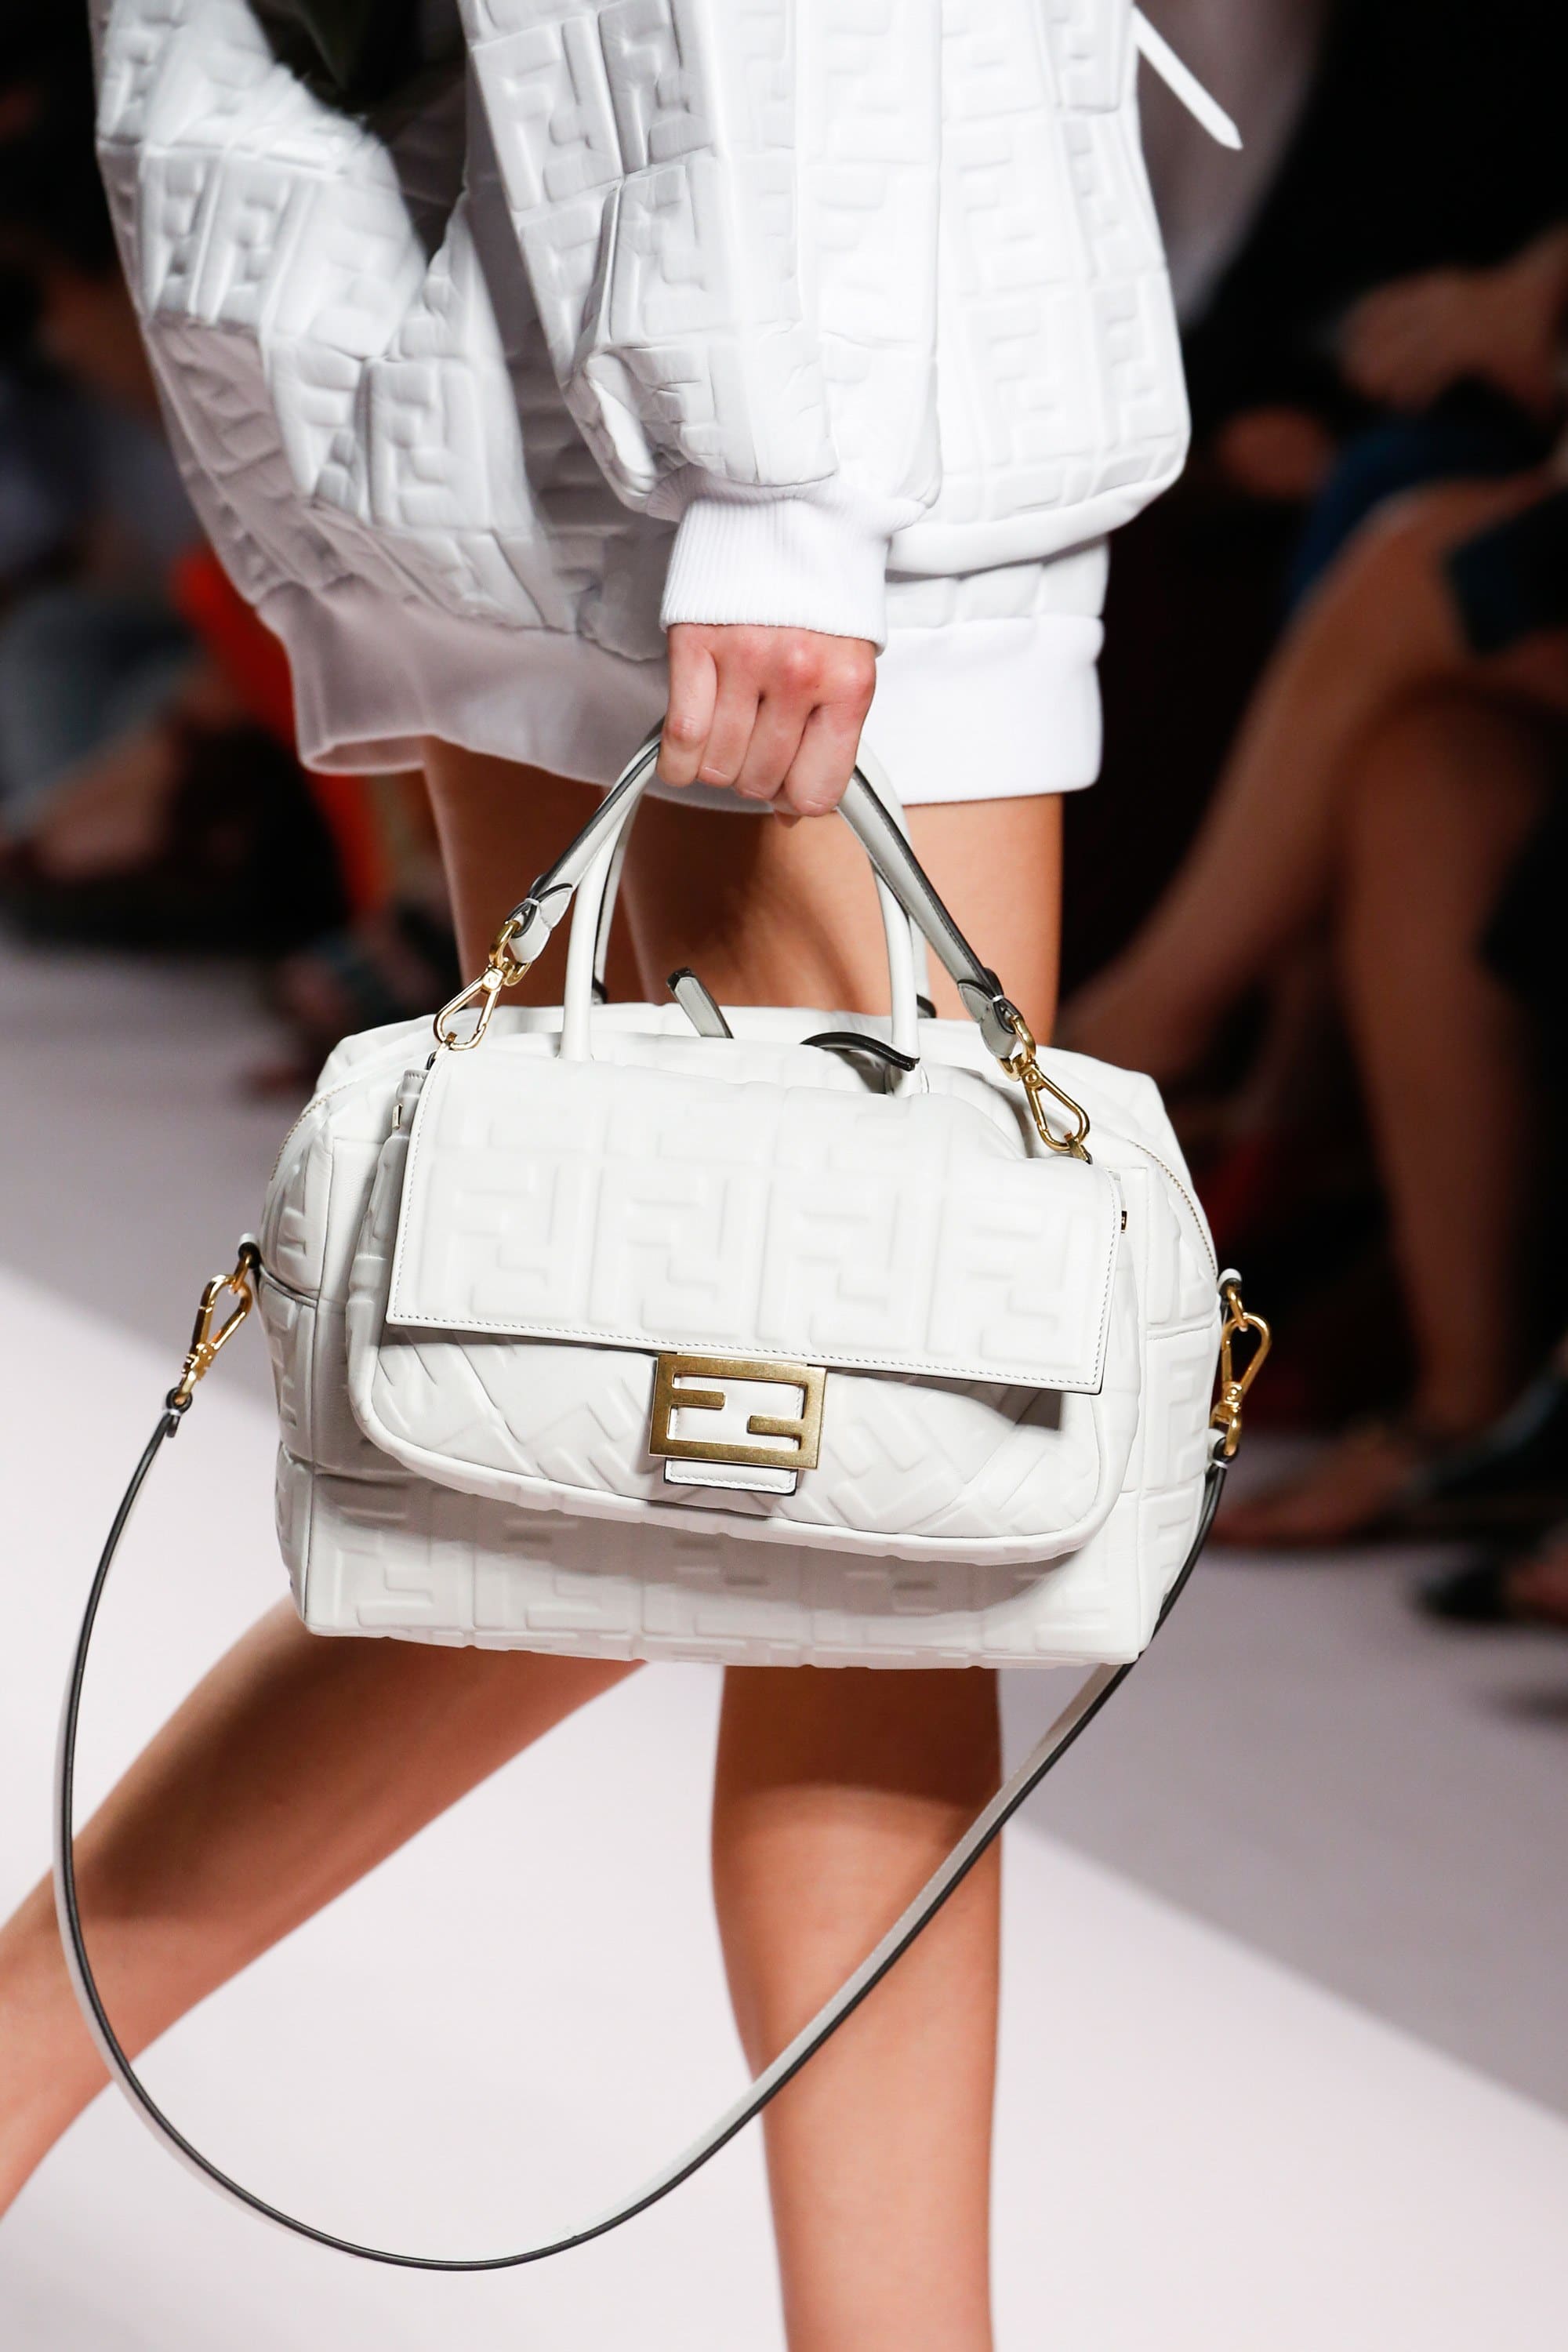 Fendi Spring/Summer 2019 Runway Bag Collection | Spotted Fashion